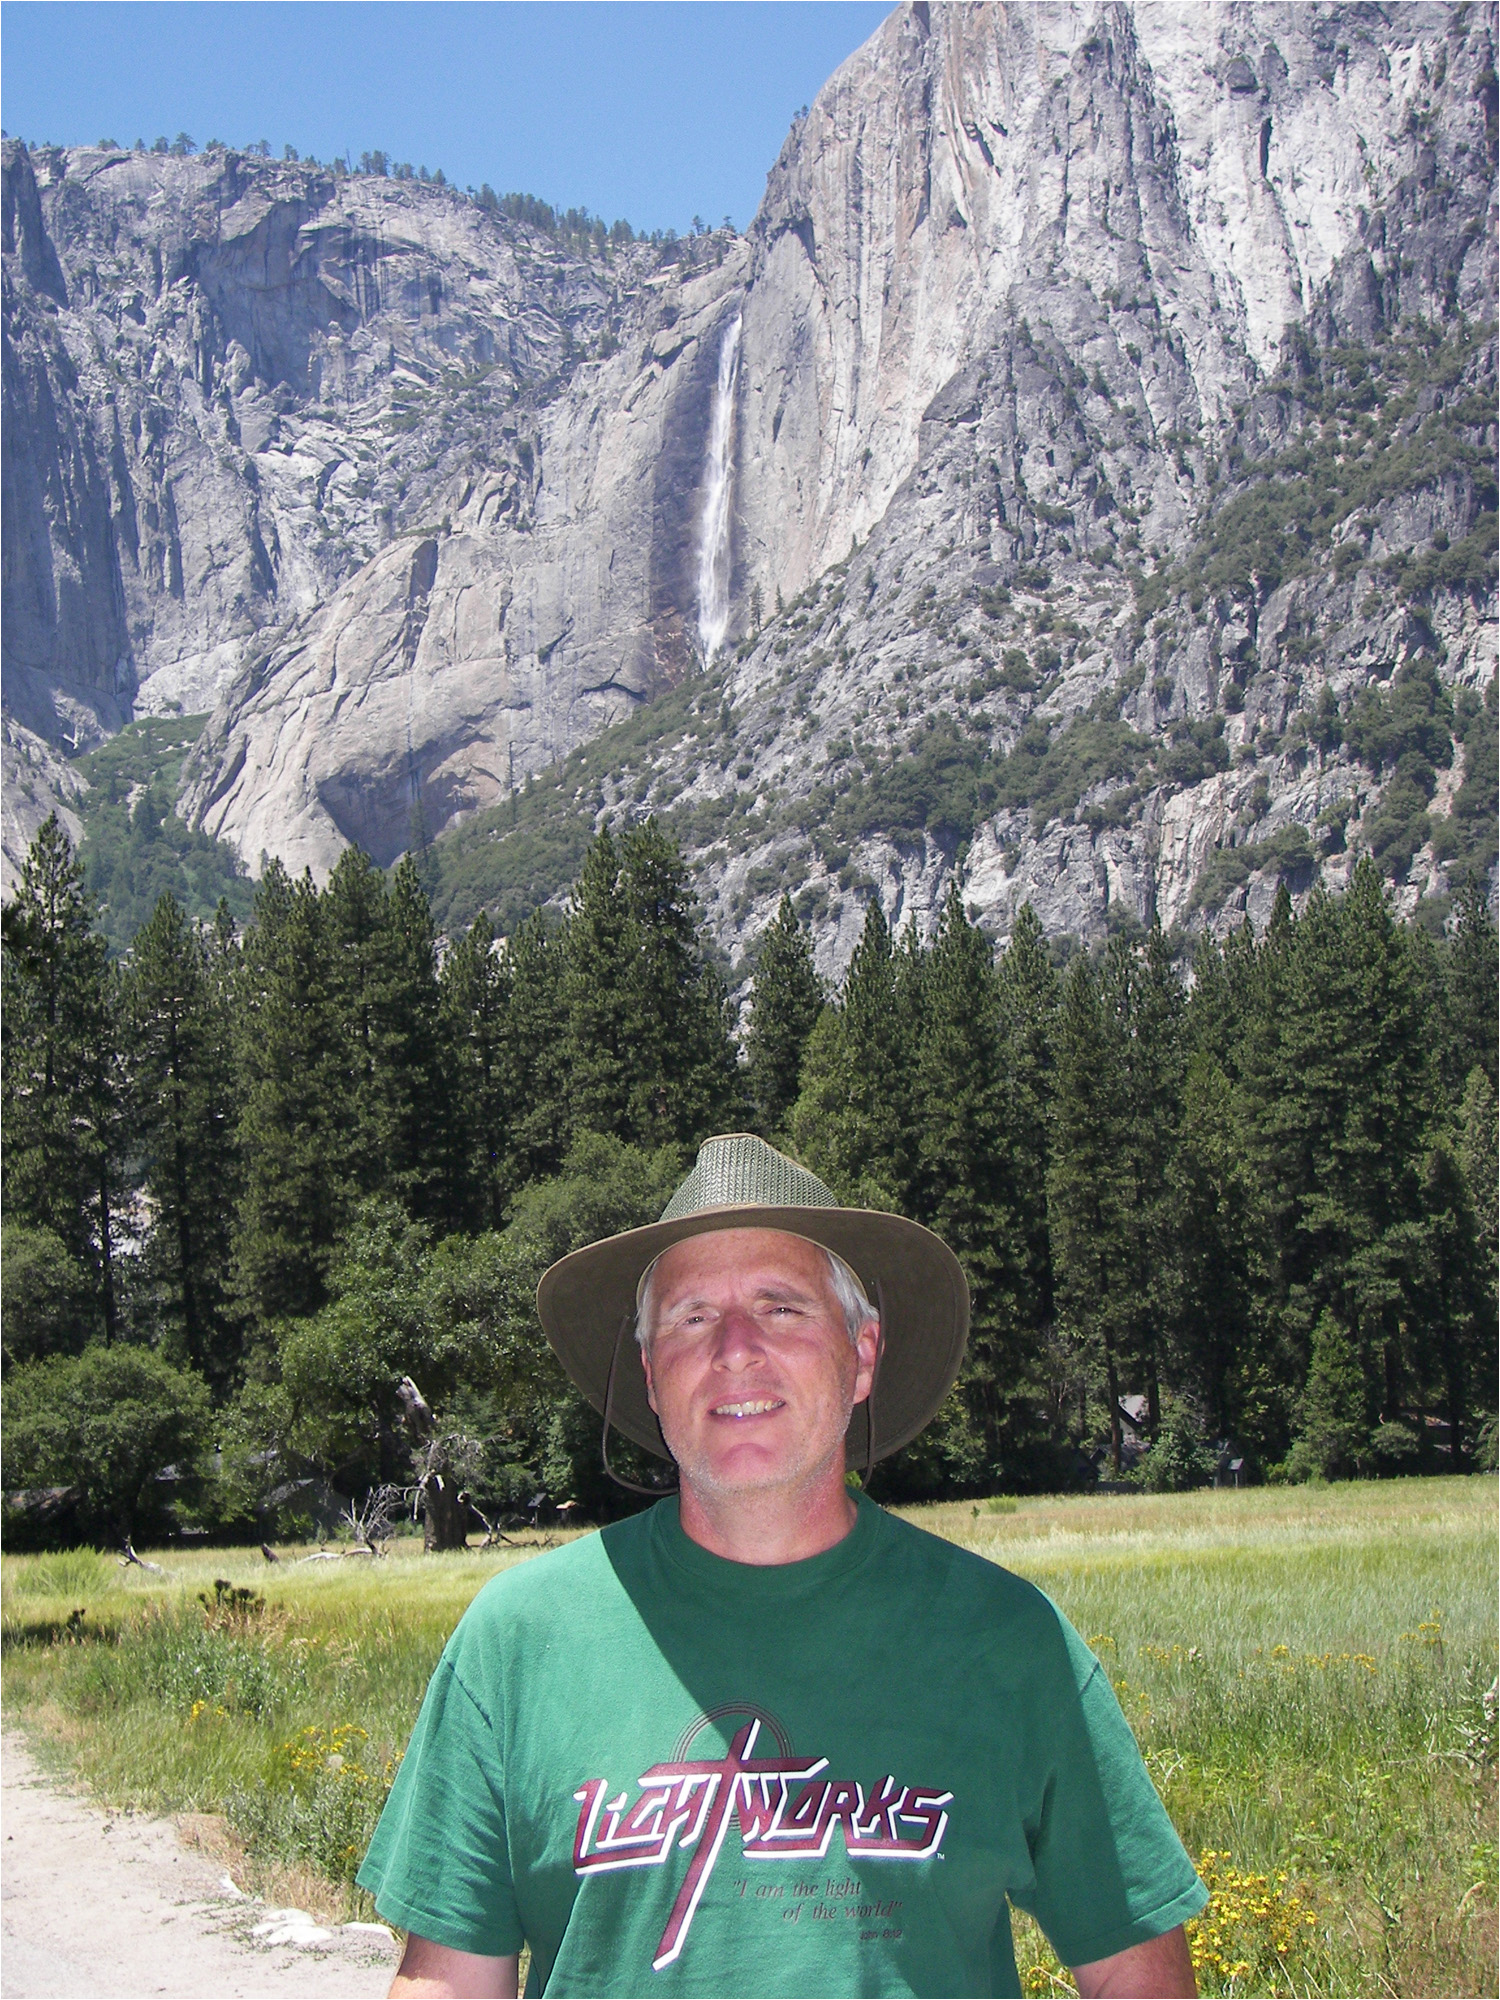 Here I am with Yosemite Falls in the background